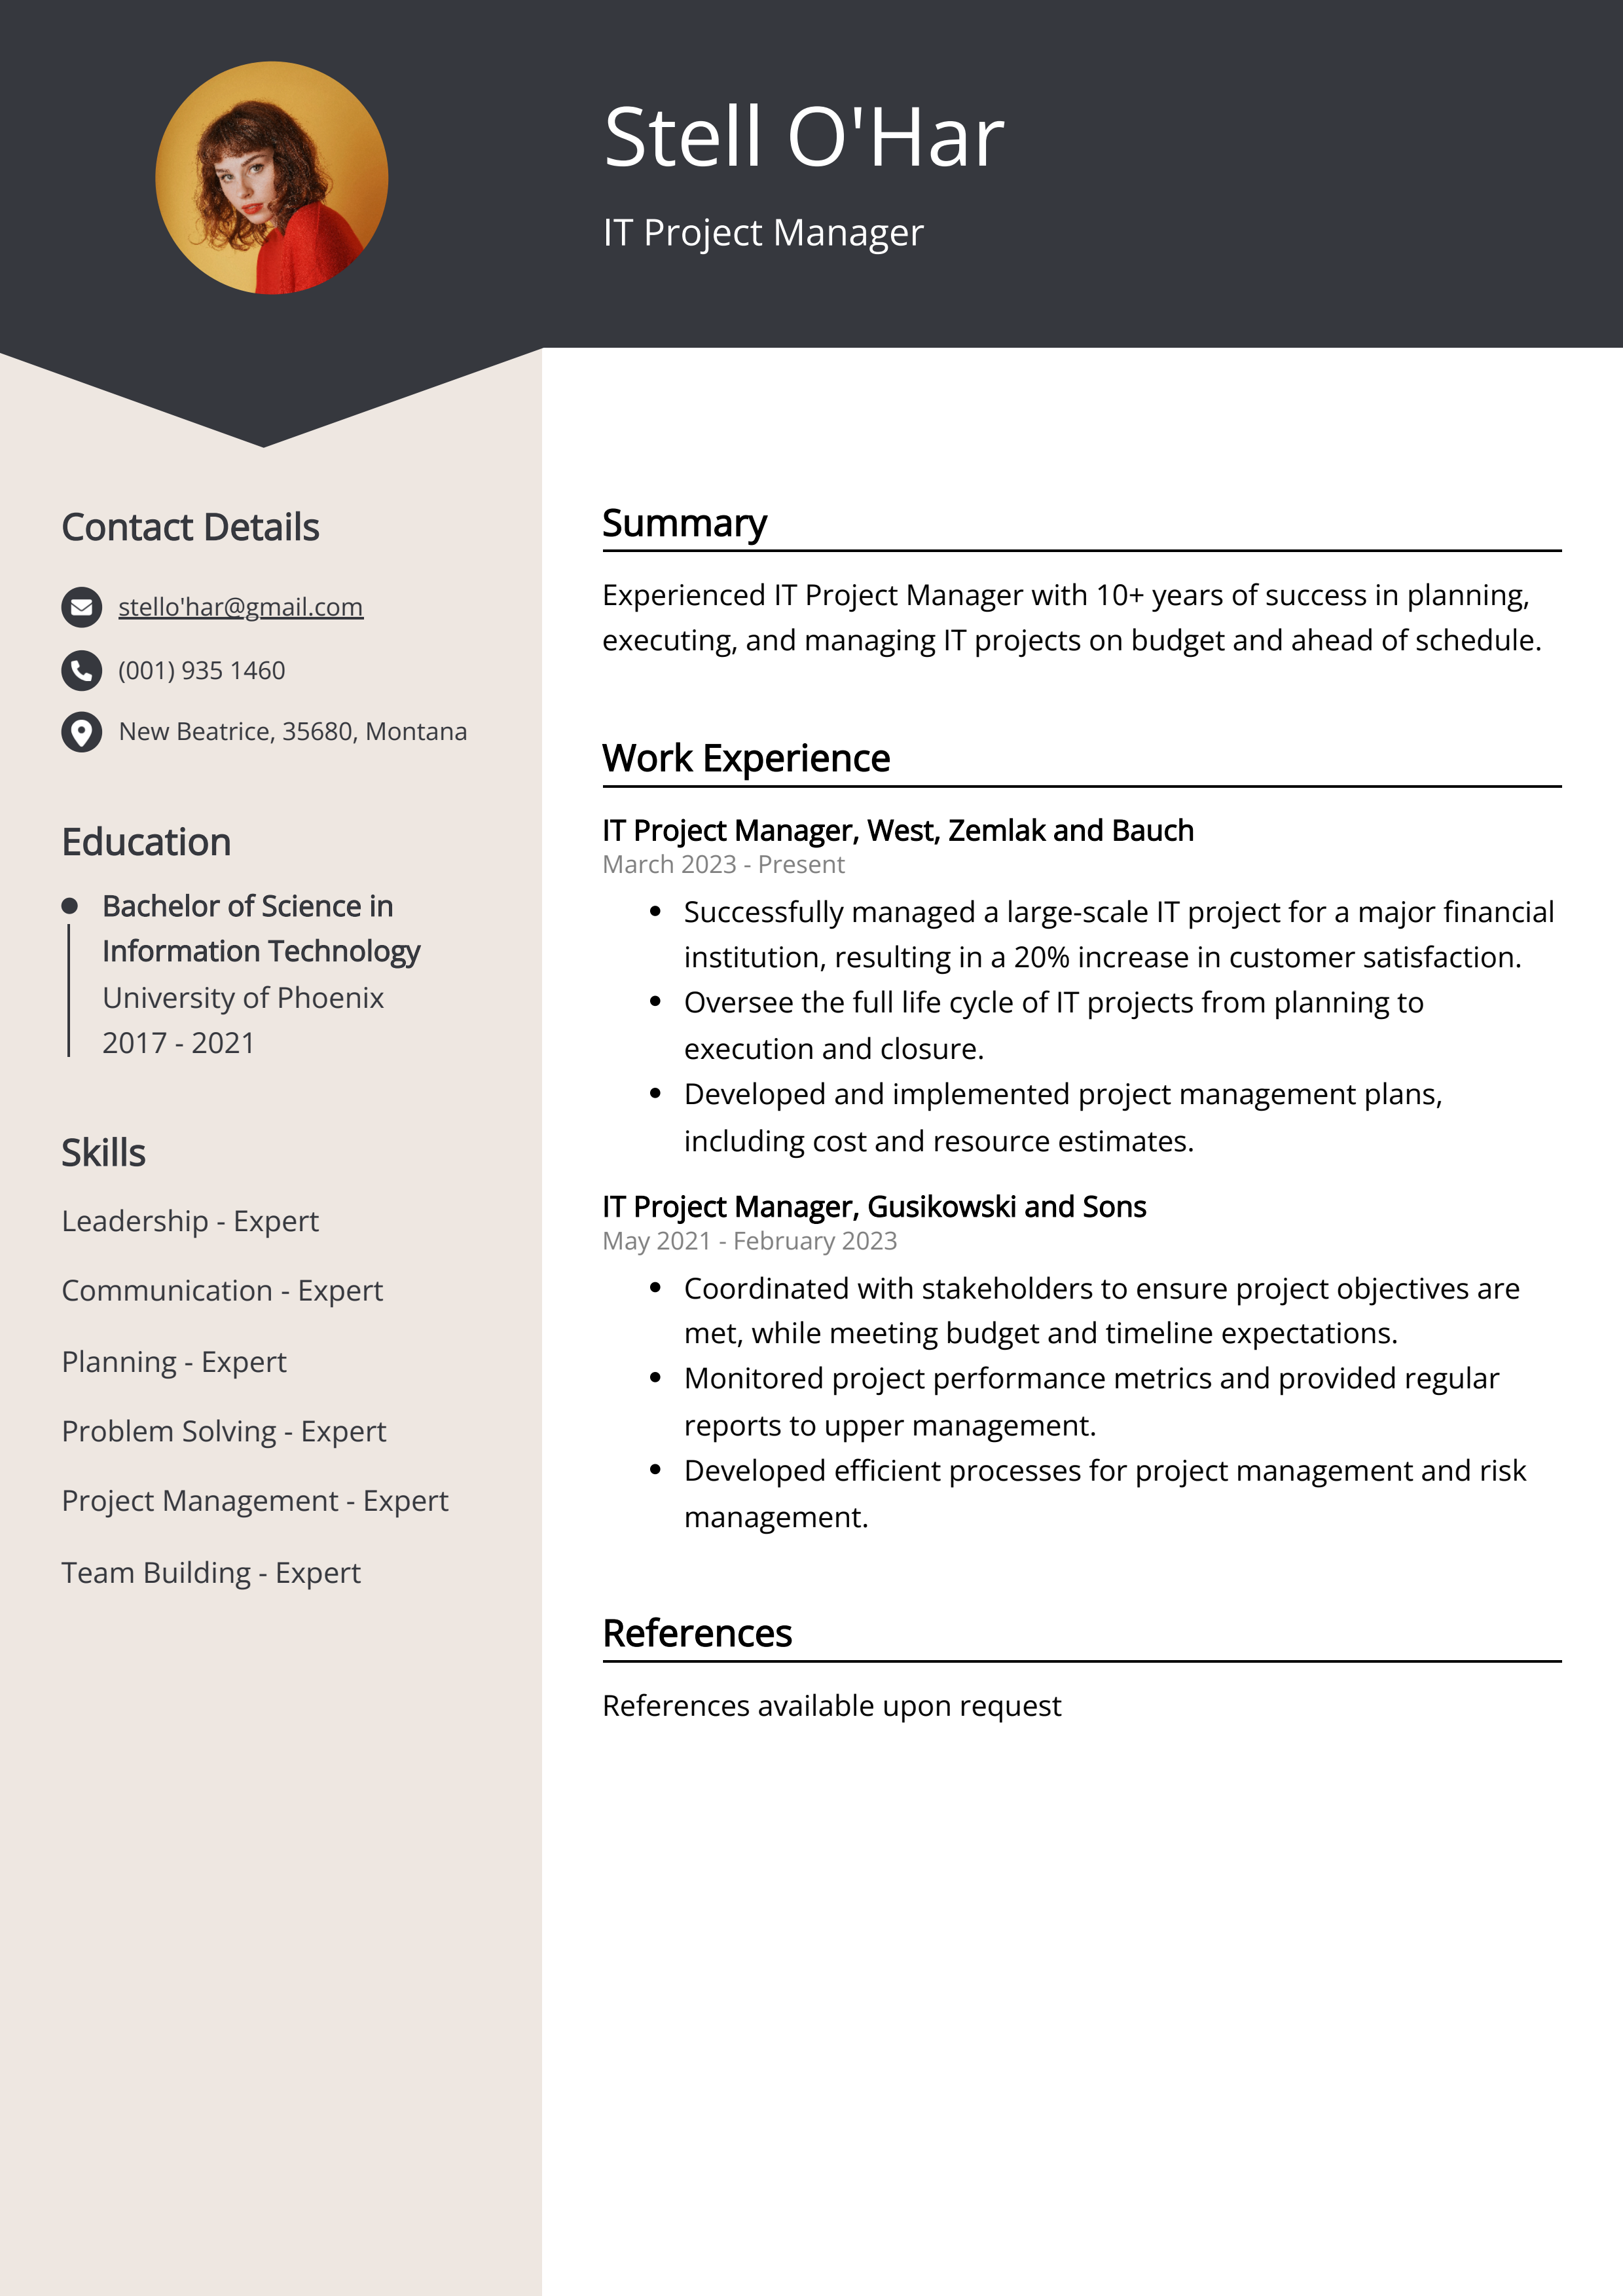 IT Project Manager CV Example